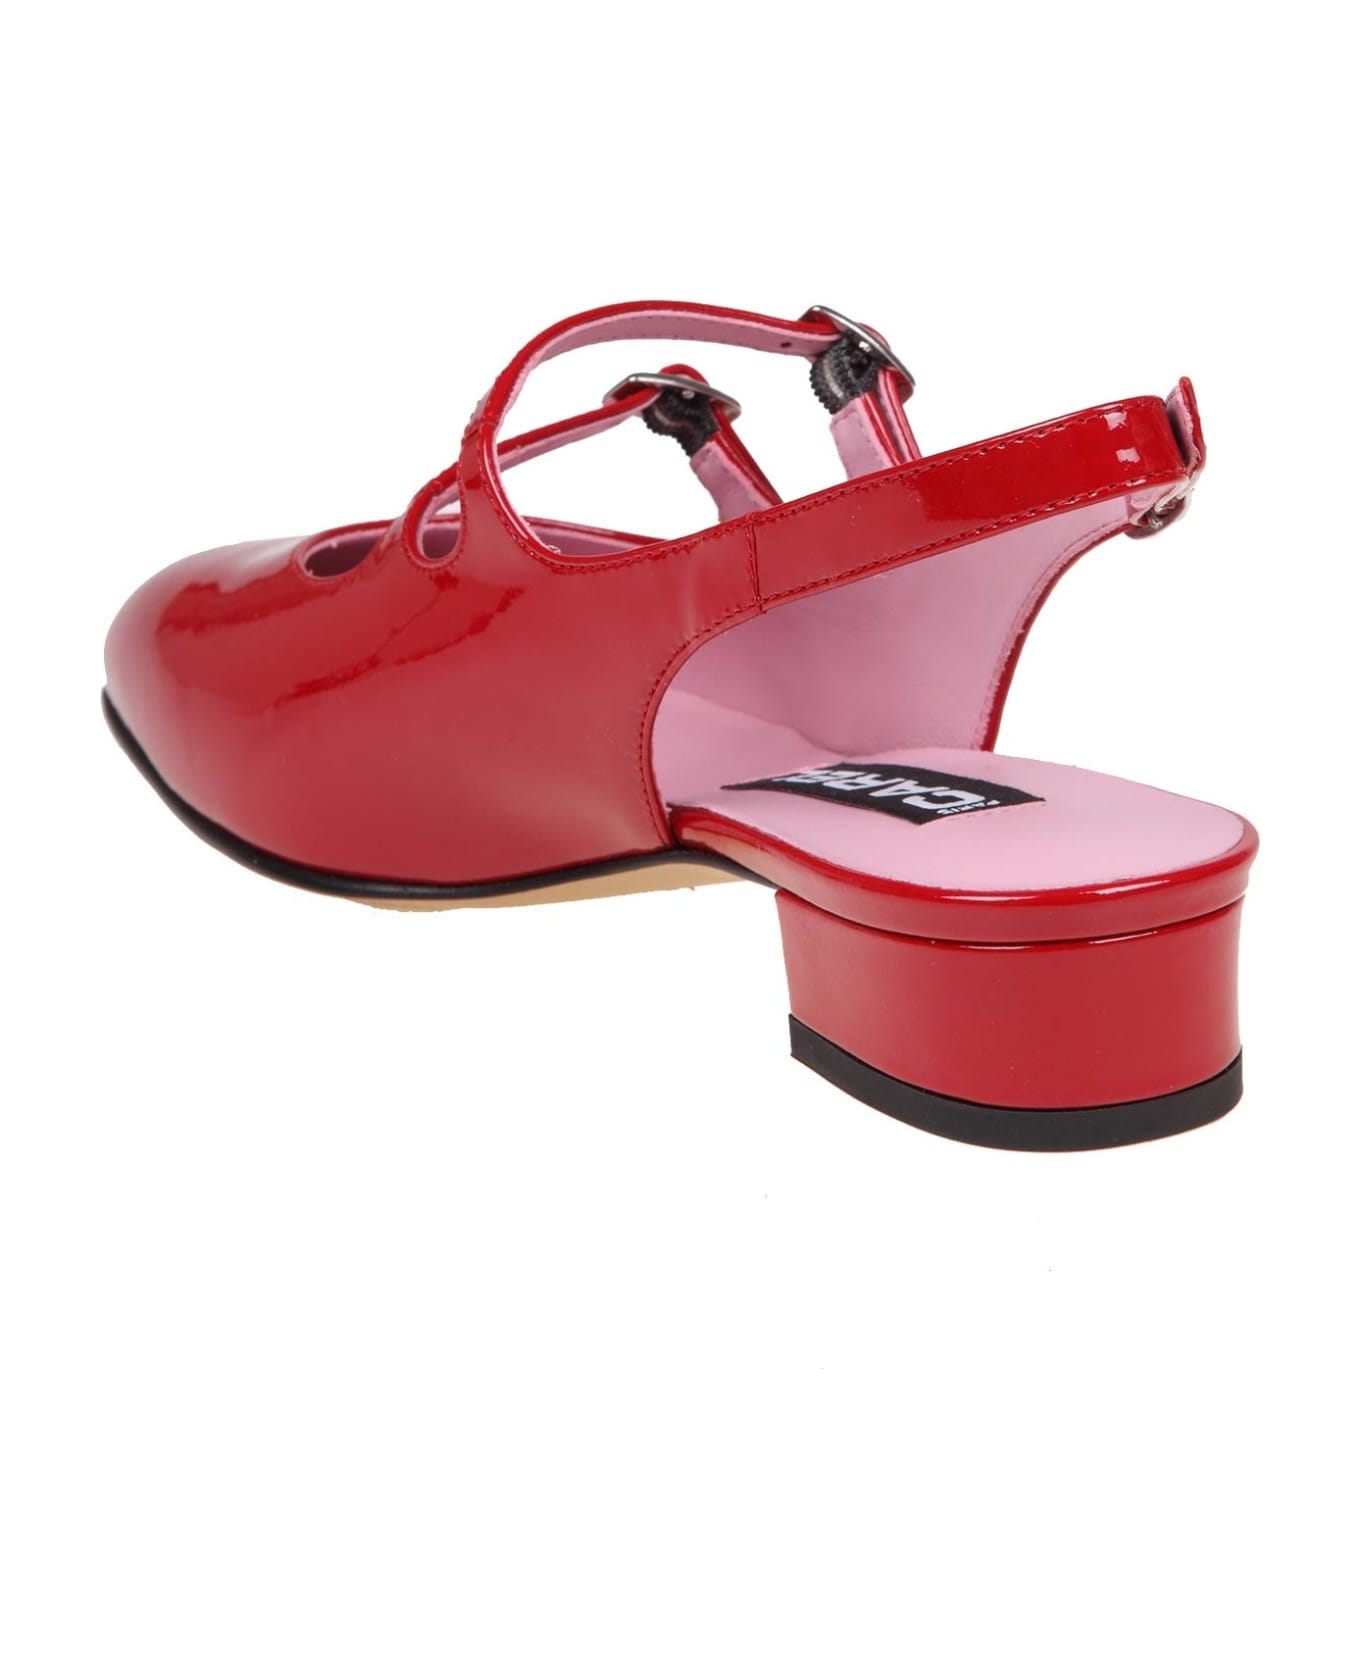 Carel Slingback In Red Patent Leather - Rouge ハイヒール